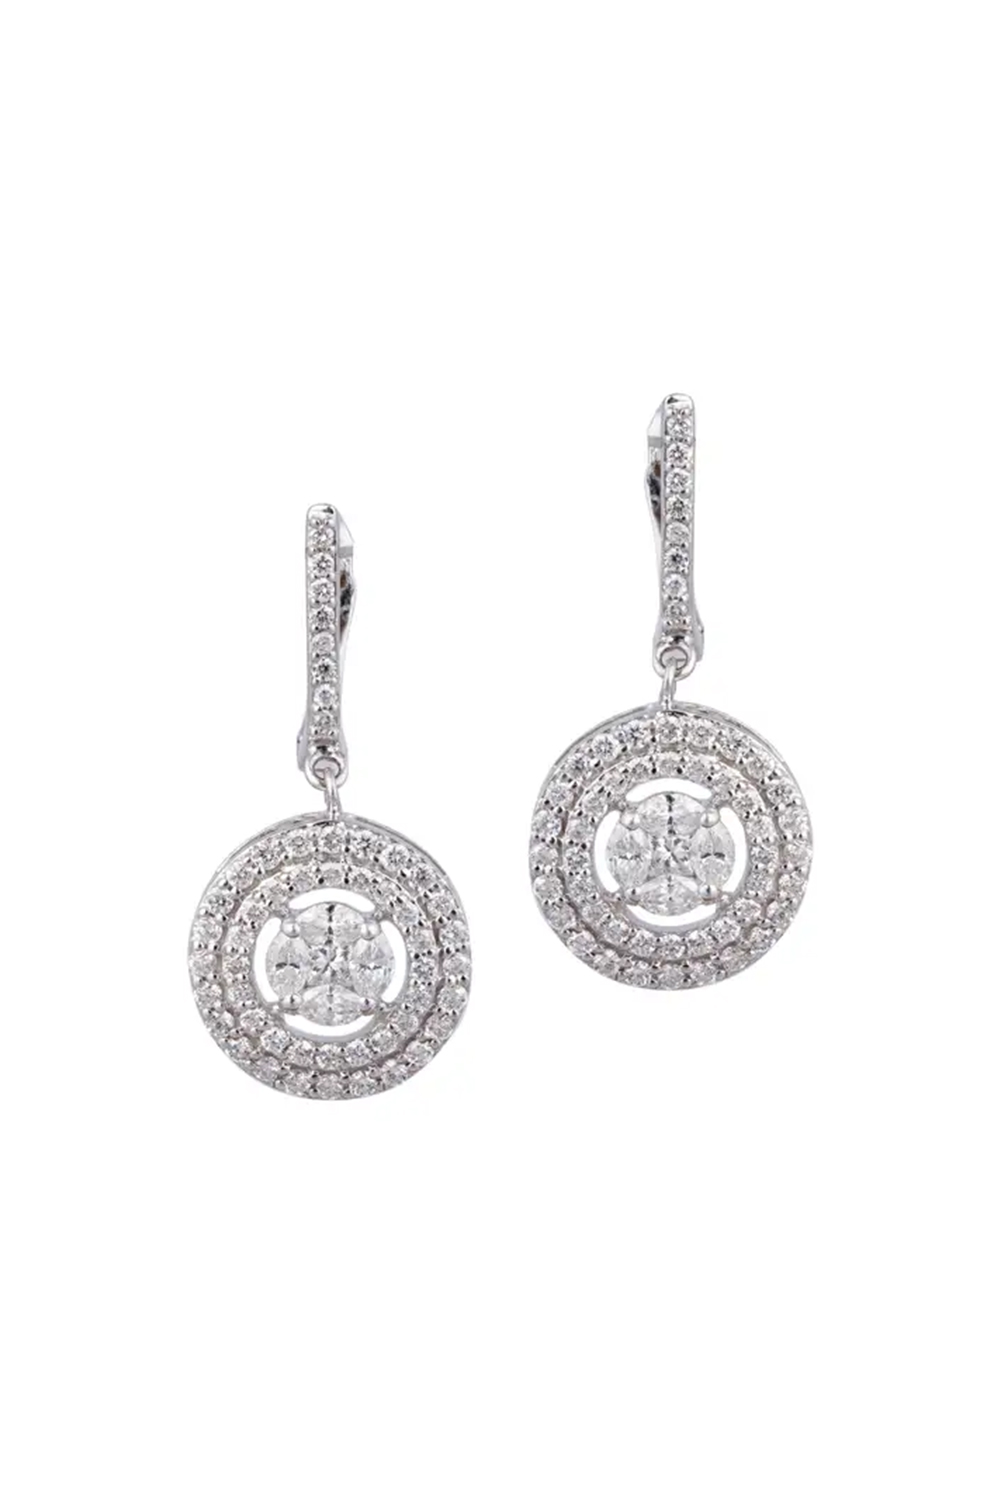 18k gold Diamond Earring with 1.72 carats of dimaonds